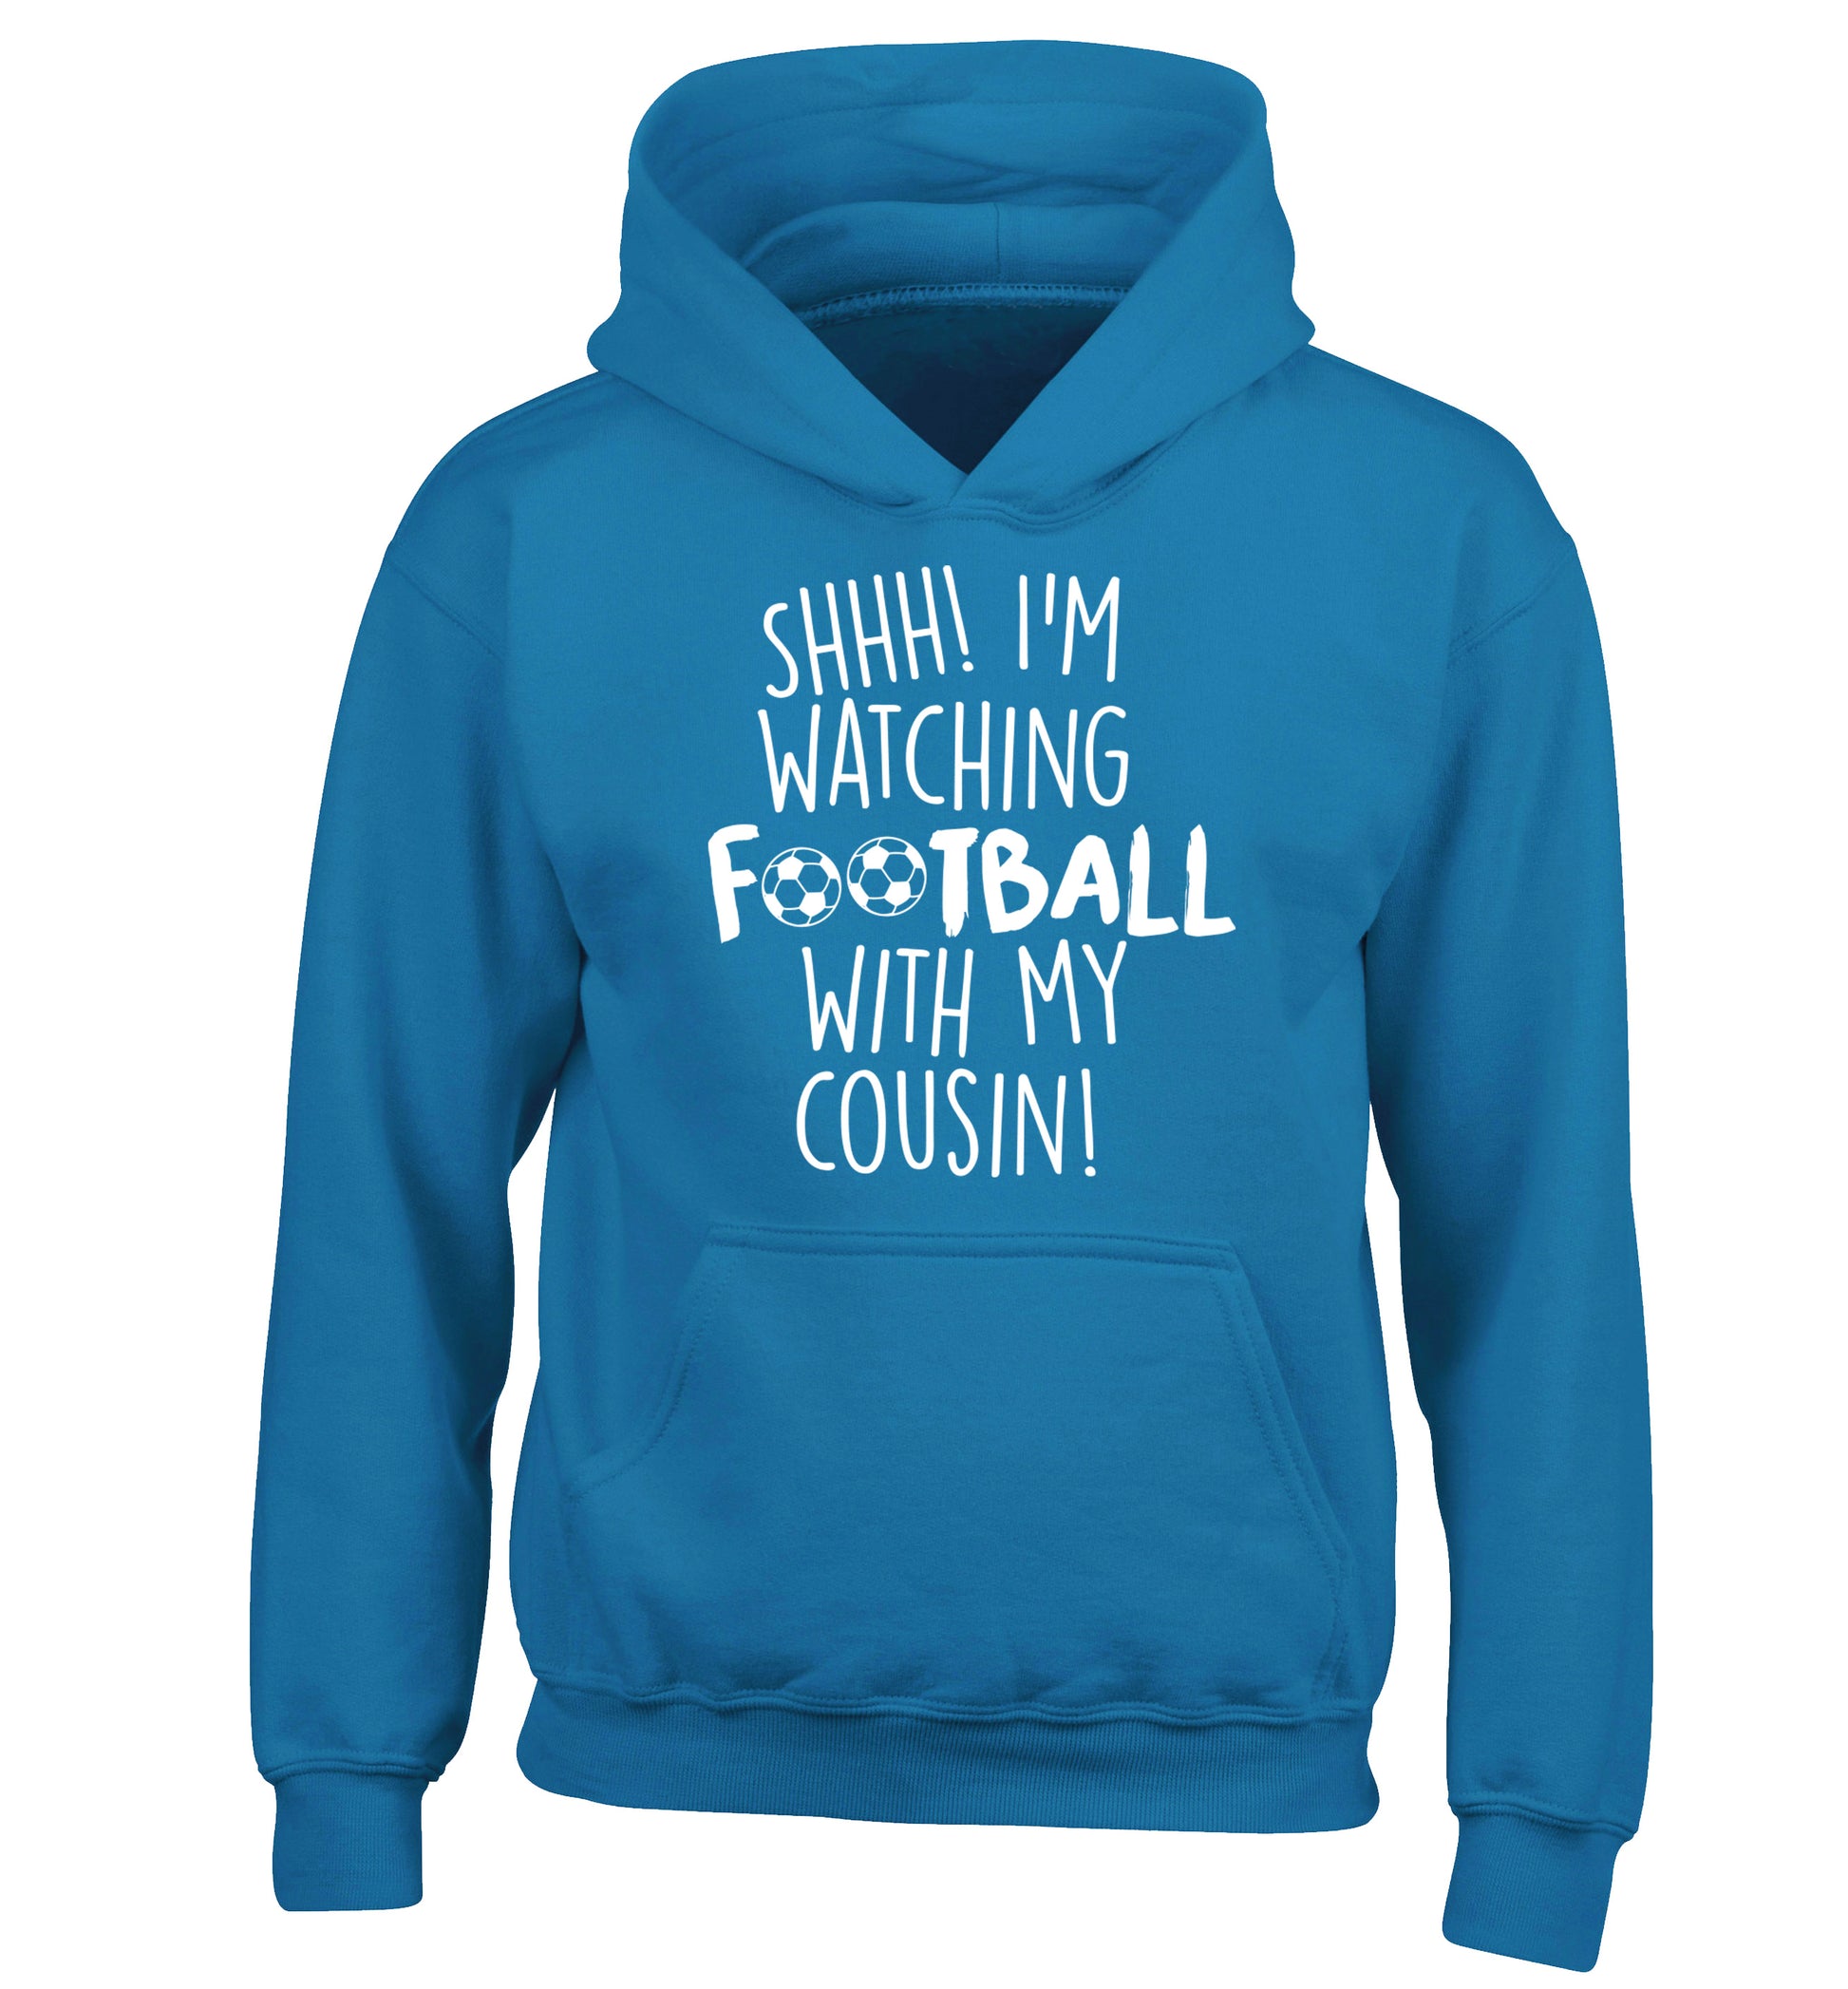 Shhh I'm watching football with my cousin children's blue hoodie 12-14 Years